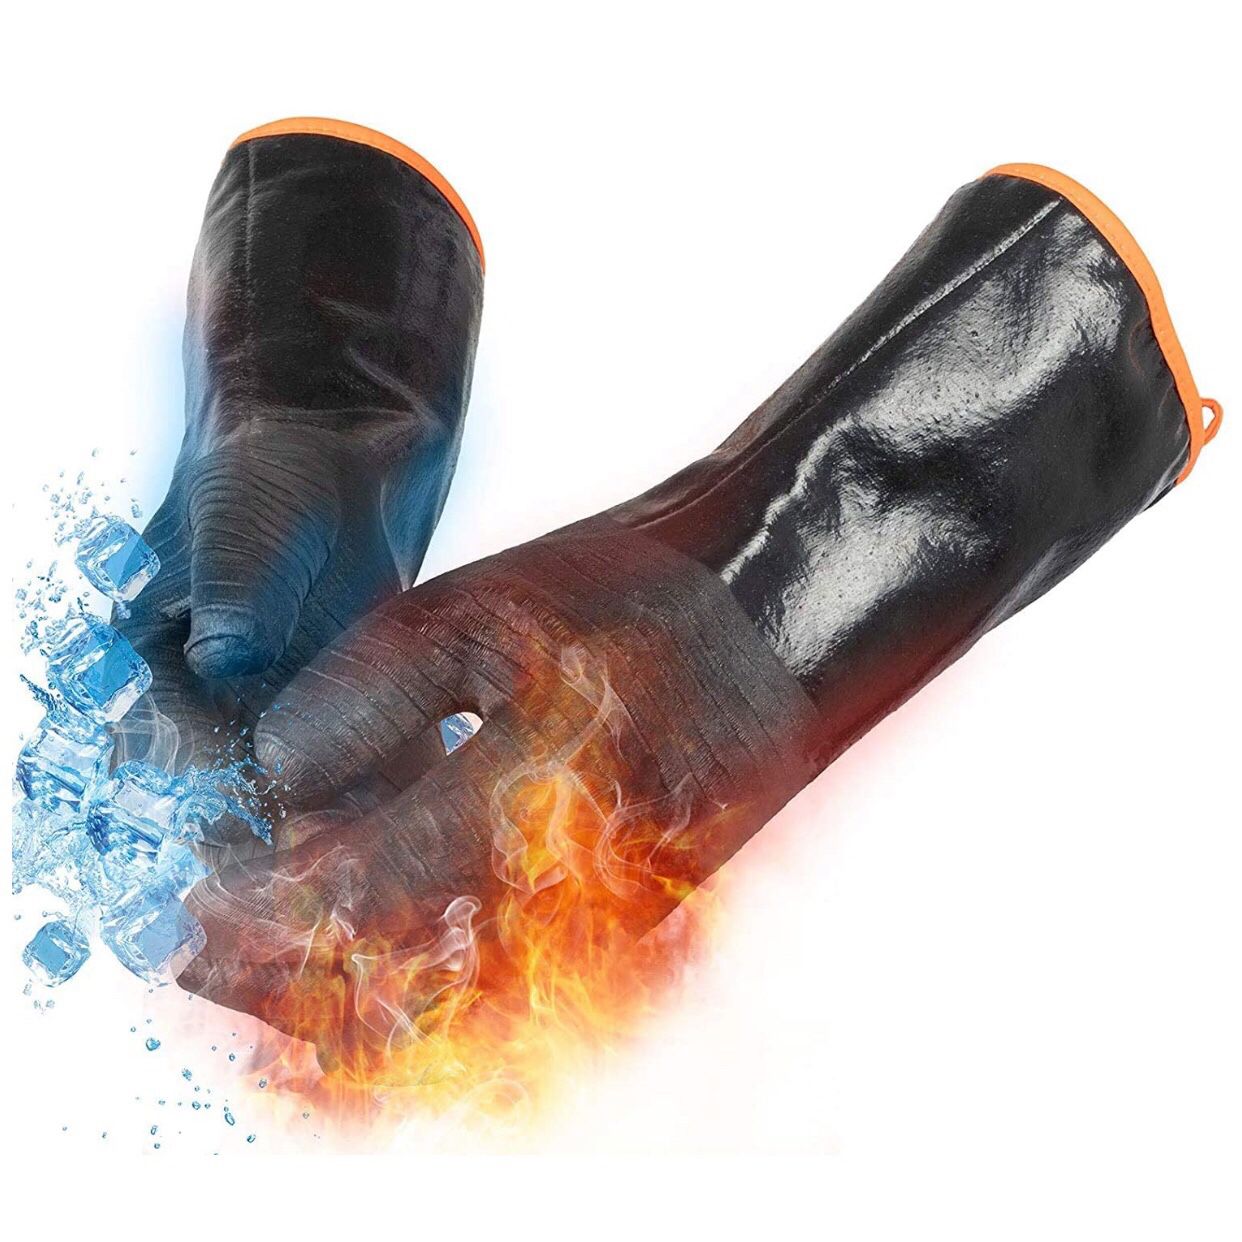 Grill BBQ Gloves, 932℉ Heat Resistant Oven Gloves Cooking Barbecue Gloves, Great for Barbecue, Cooking, Baking, Grilling – Waterproof, Fireproof, Oil